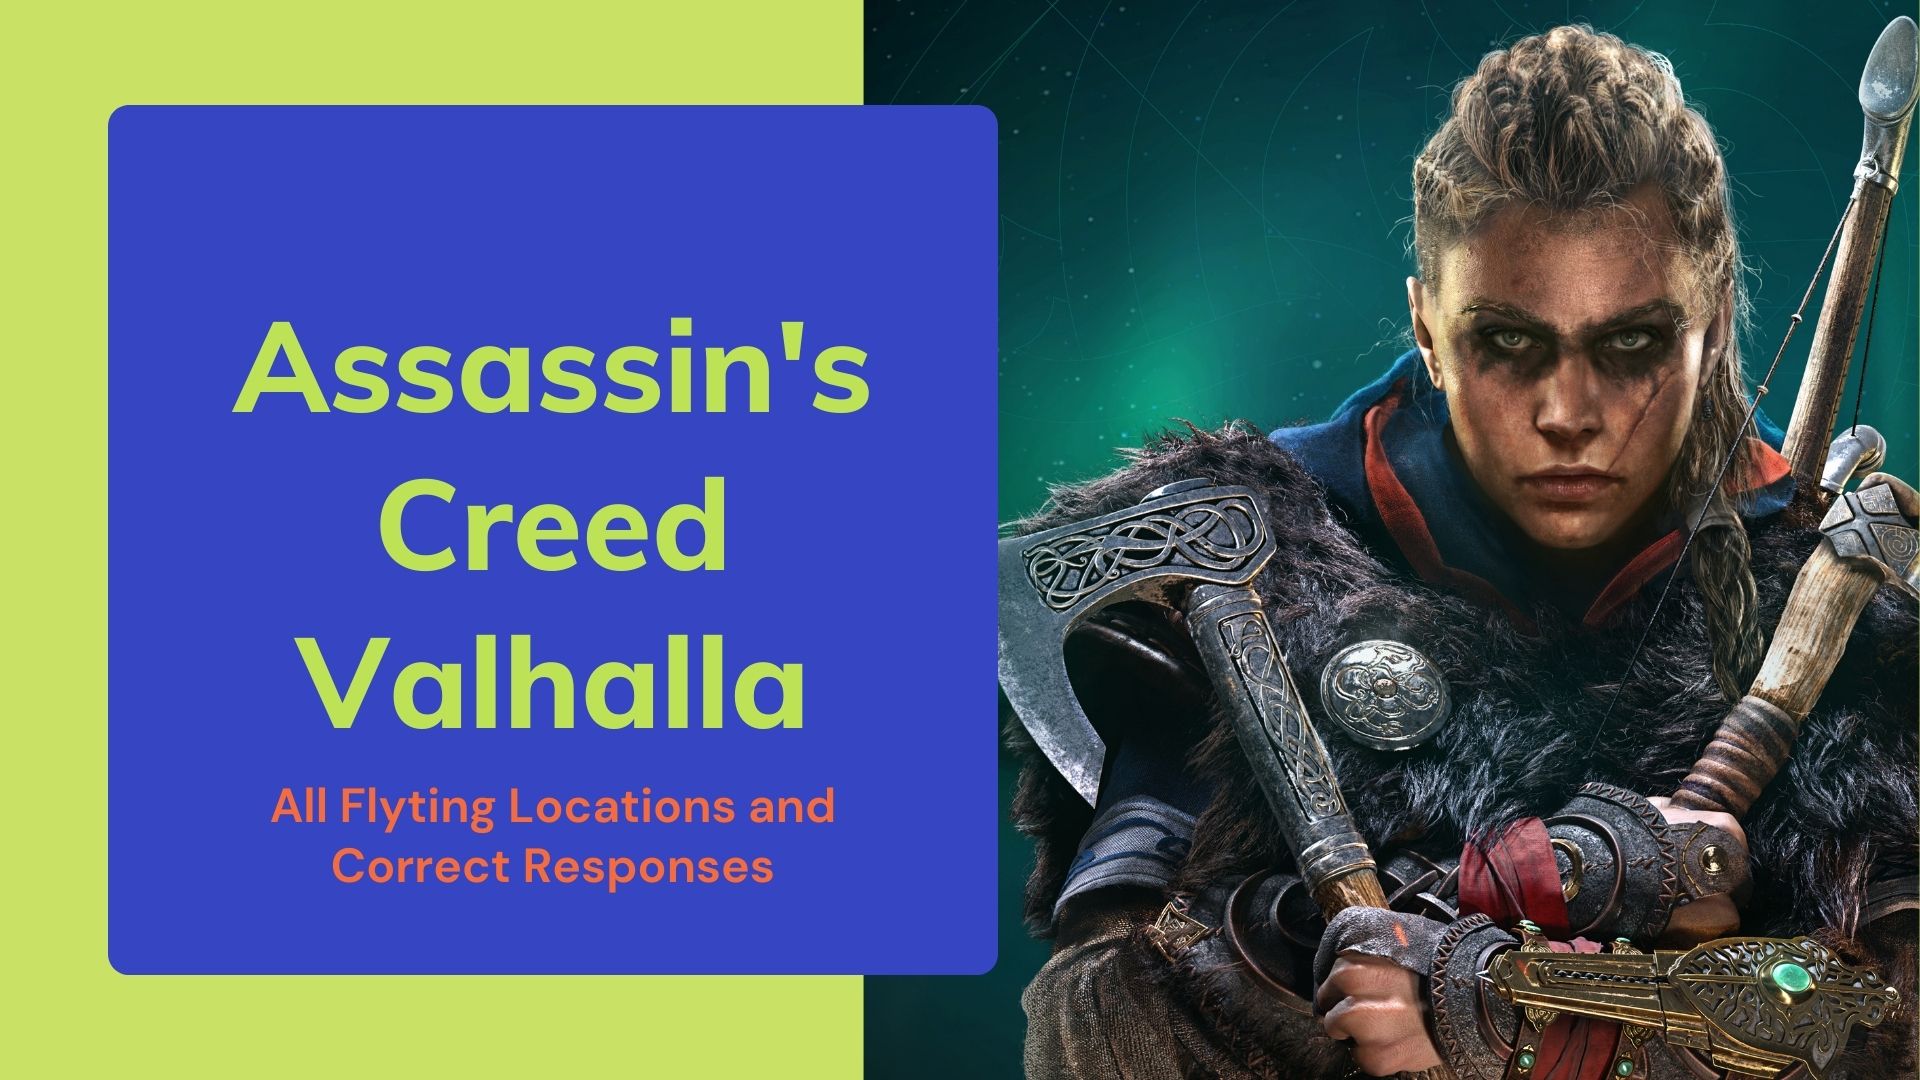 Did you find all AC Valhalla flyting locations? 